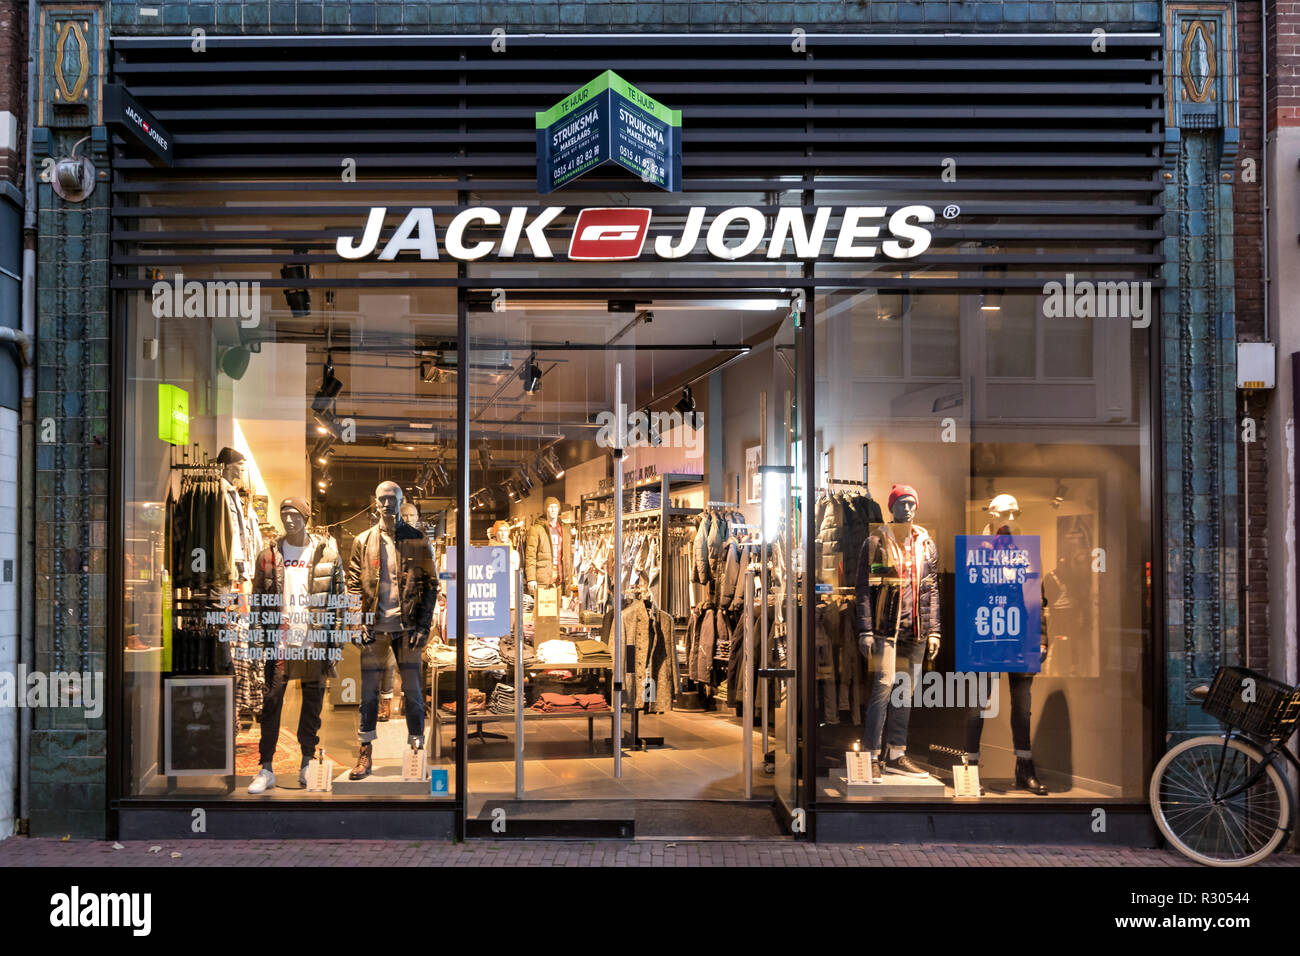 Jack And Jones High Resolution Stock Photography and Images - Alamy